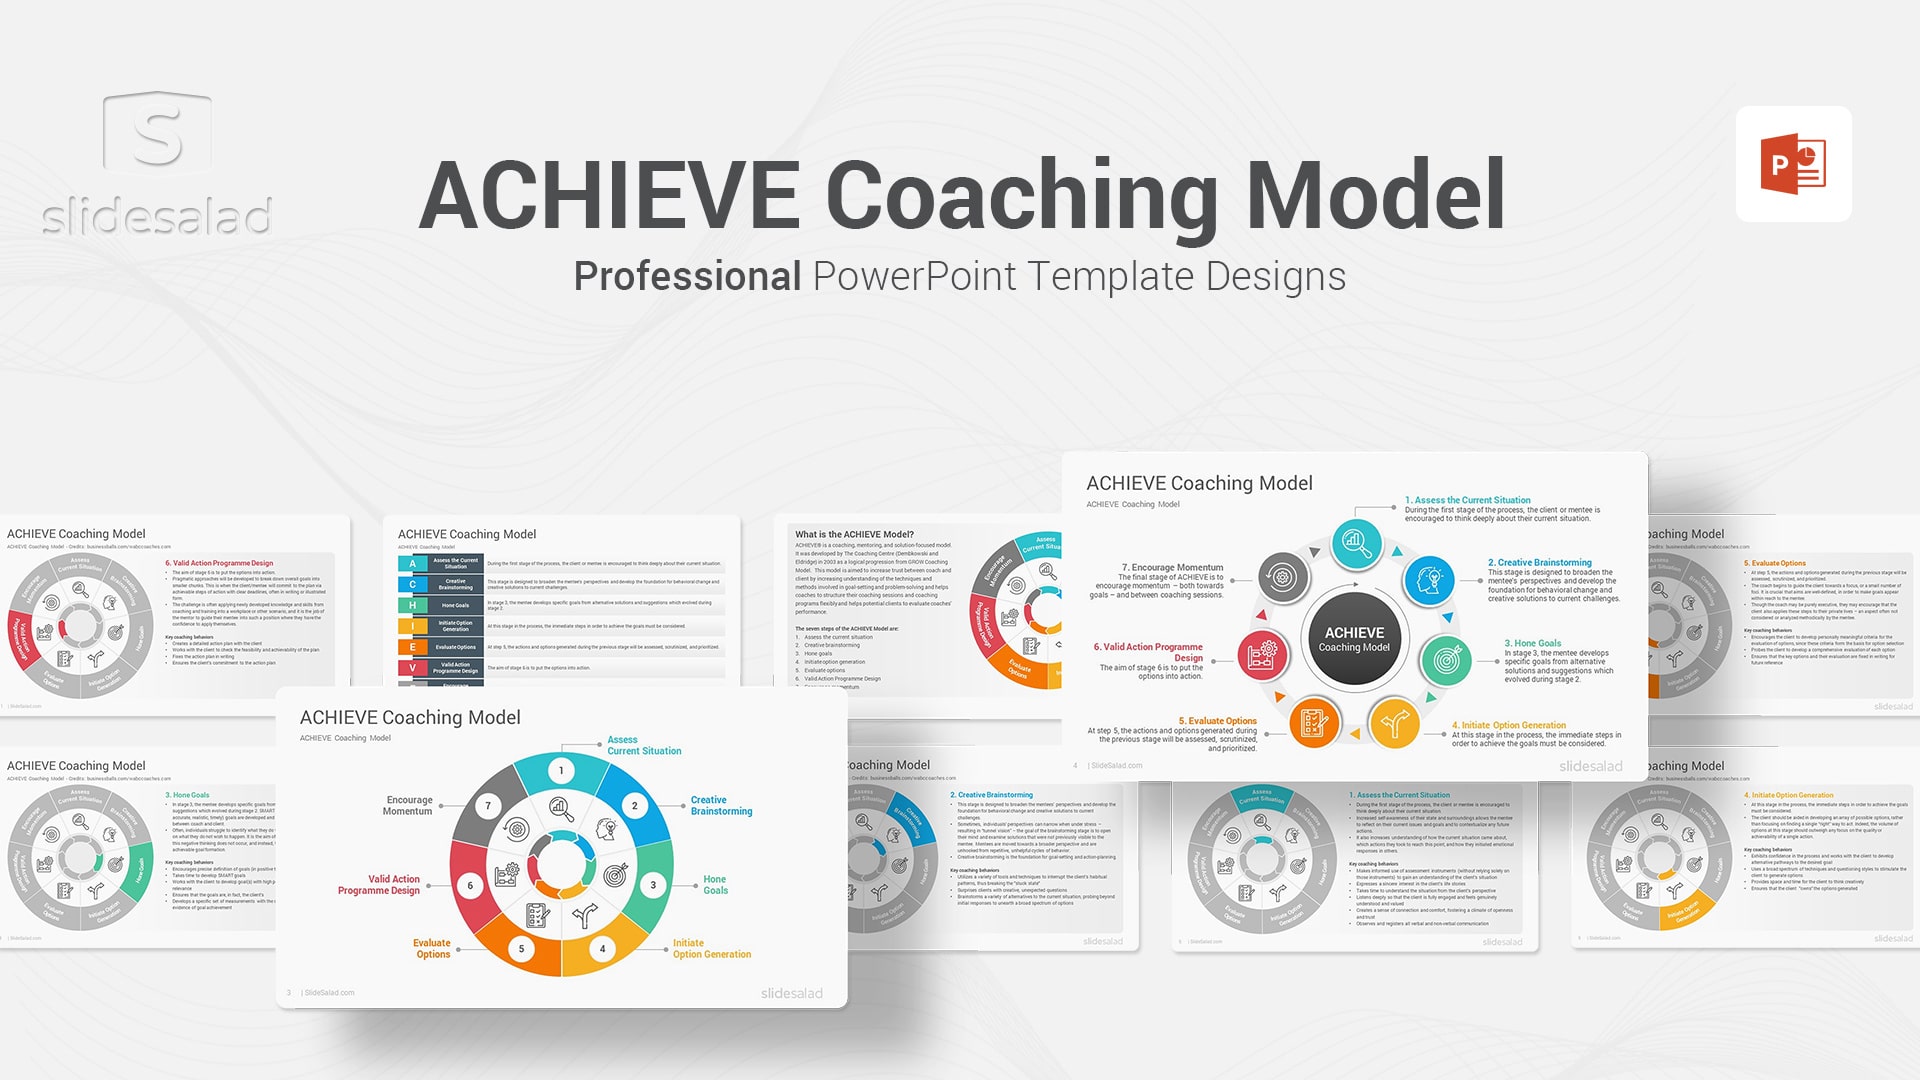 ACHIEVE Coaching Model PowerPoint Template - Clean Slide Designs to Show Best Results to Your Clients by Following a Measurable and Sustainable Methodology